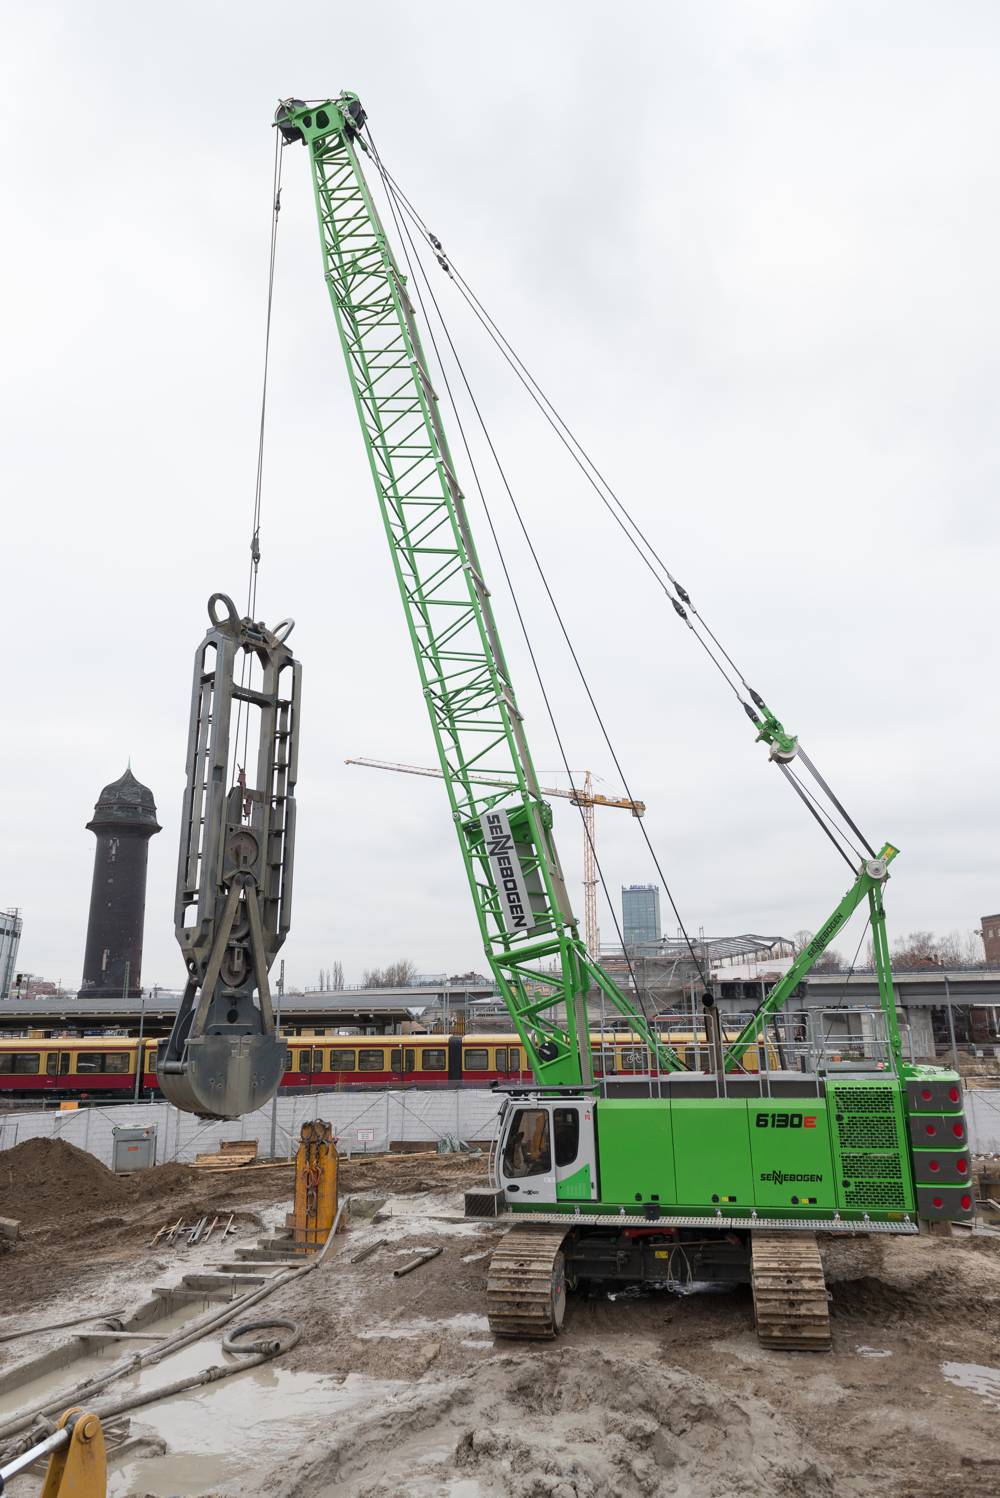 Implementation of a total of two SENNEBOGEN duty cycle cranes in diaphragm wall operations: in Berlin, foundation works are being carried out at depths of up to 25 m.